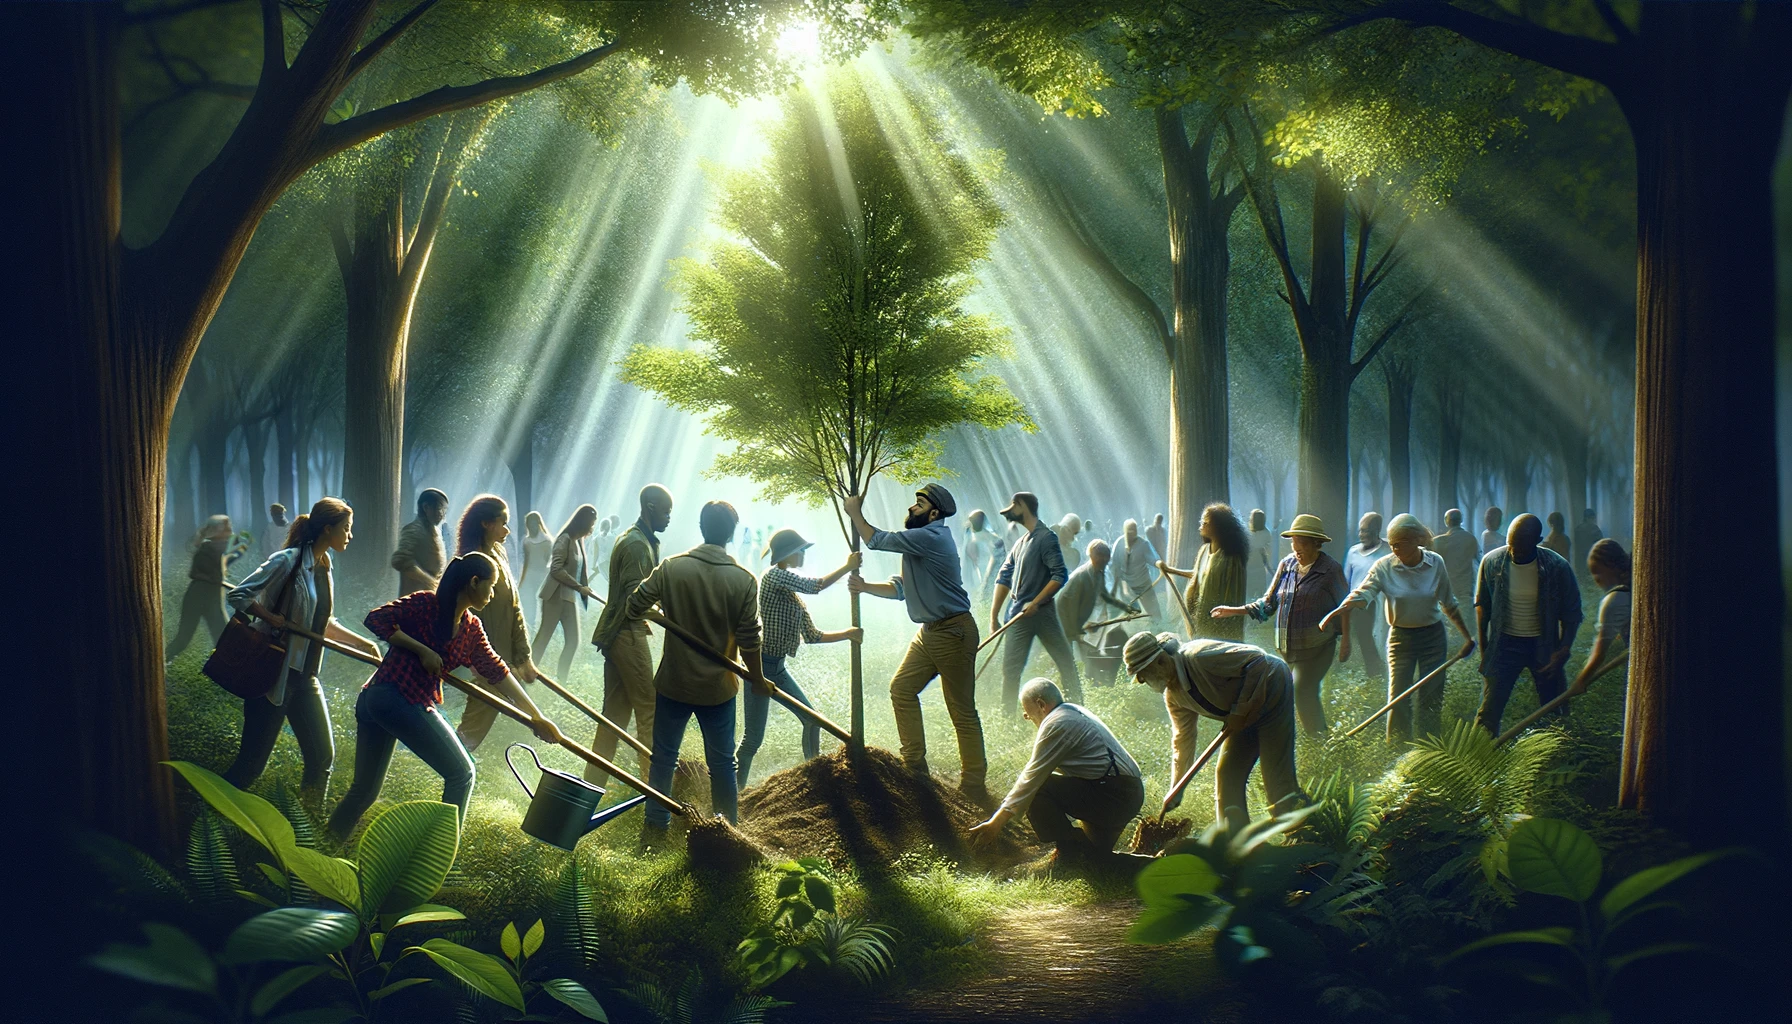 A dynamic and inspiring 16x9 image that embodies the themes of Unity and Service. The scene should feature a diverse group of people, coming together